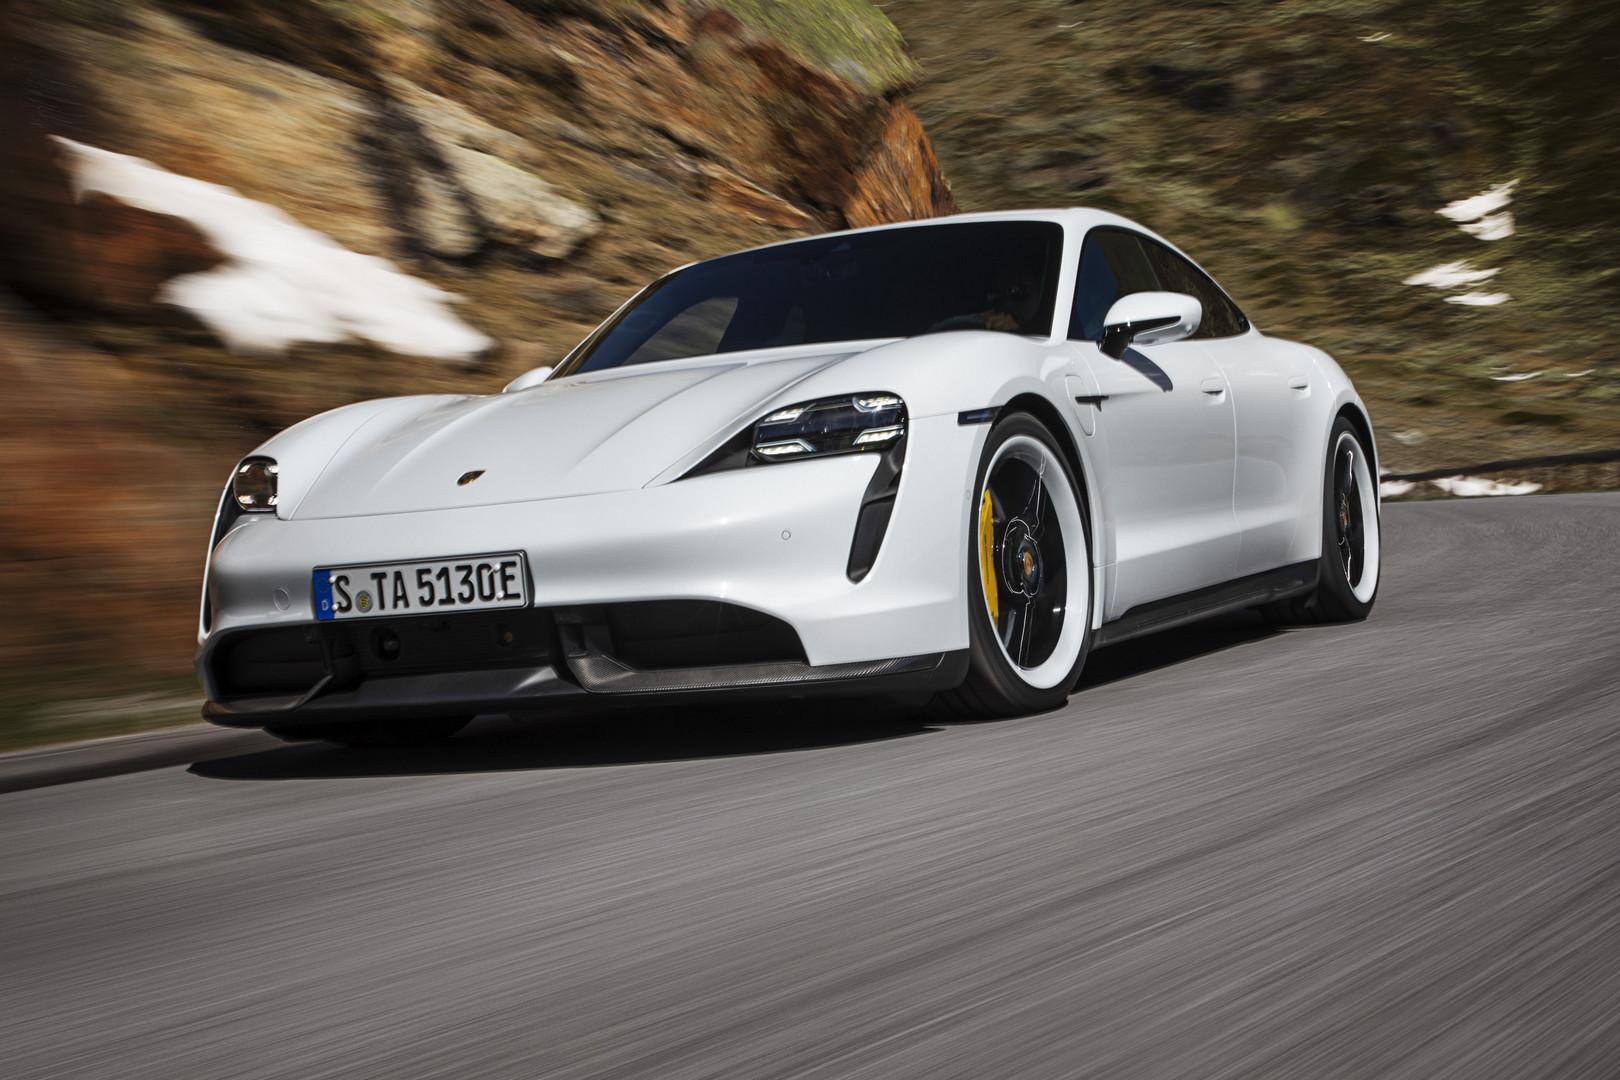 Porsche Taycan Revealed: 761hp for Taycan Turbo S